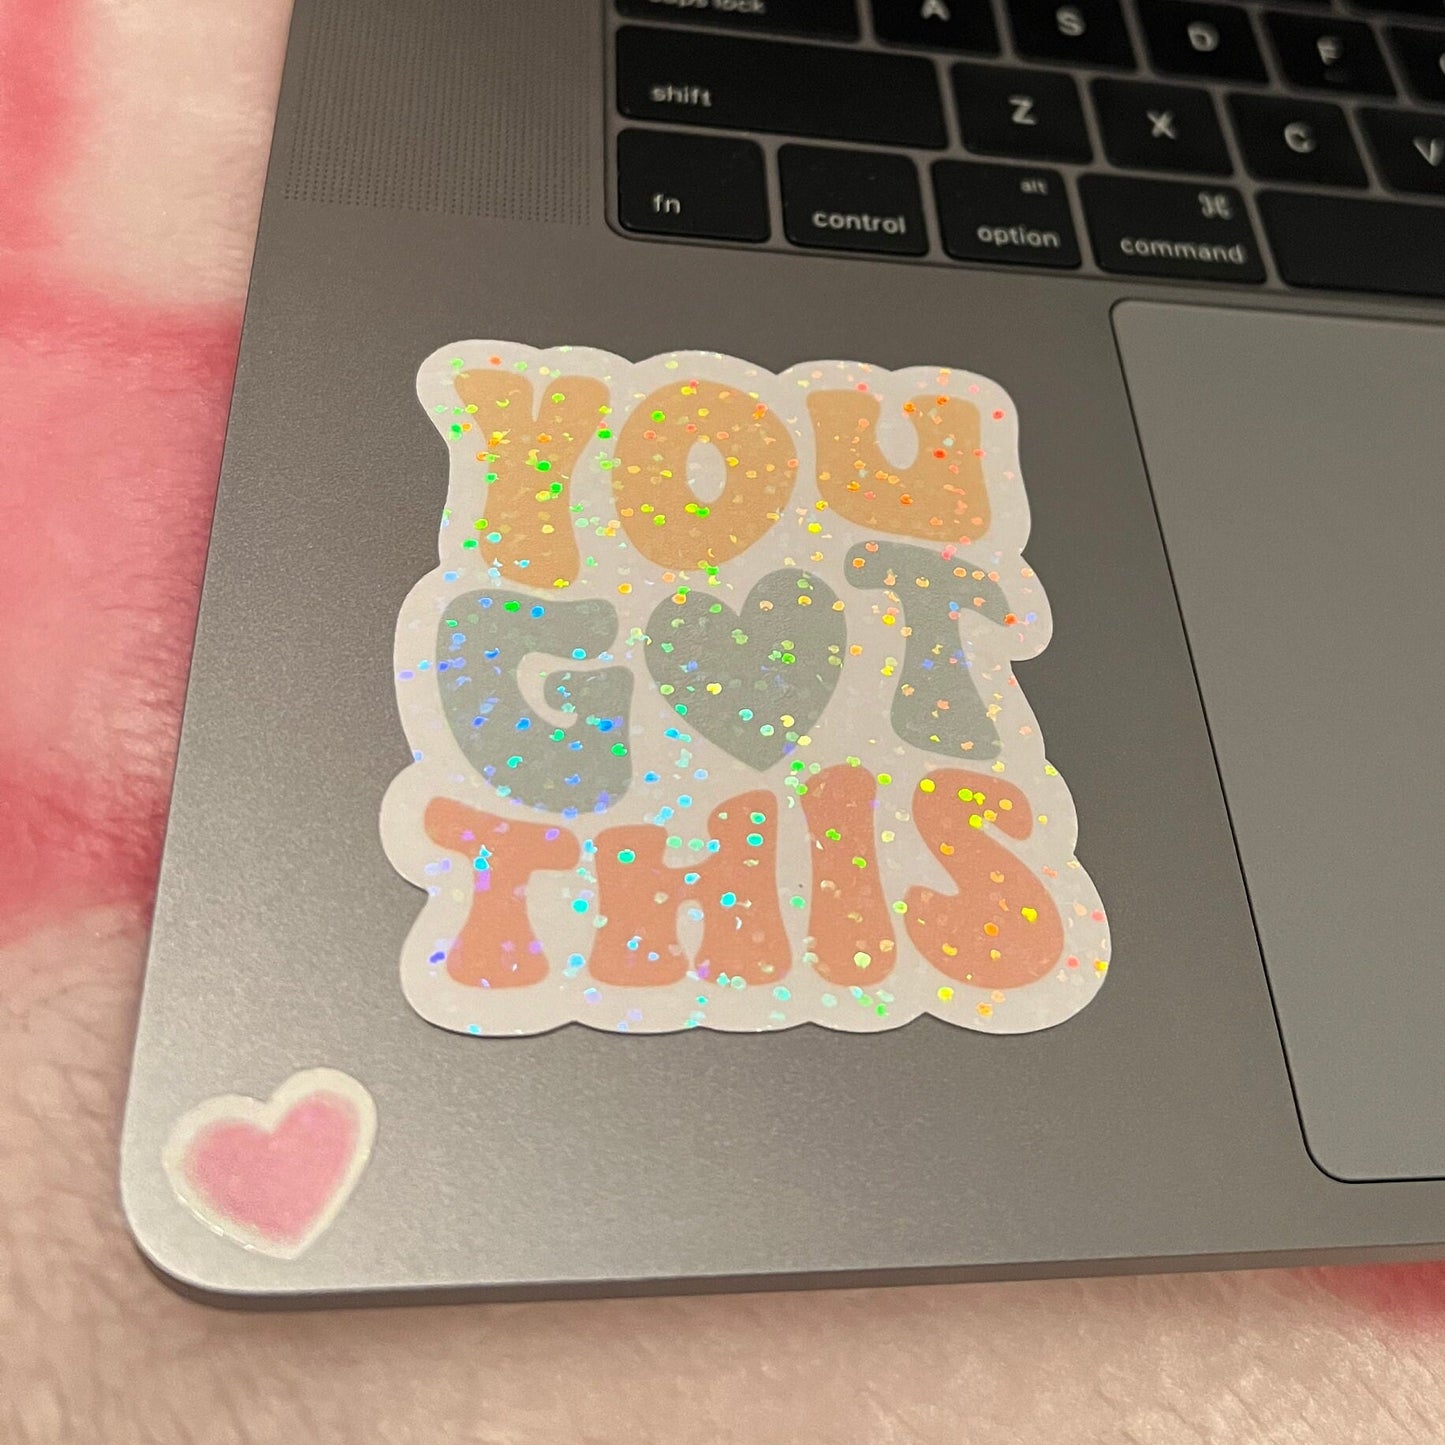 Holographic Sticker Laptop Decal - You Got This